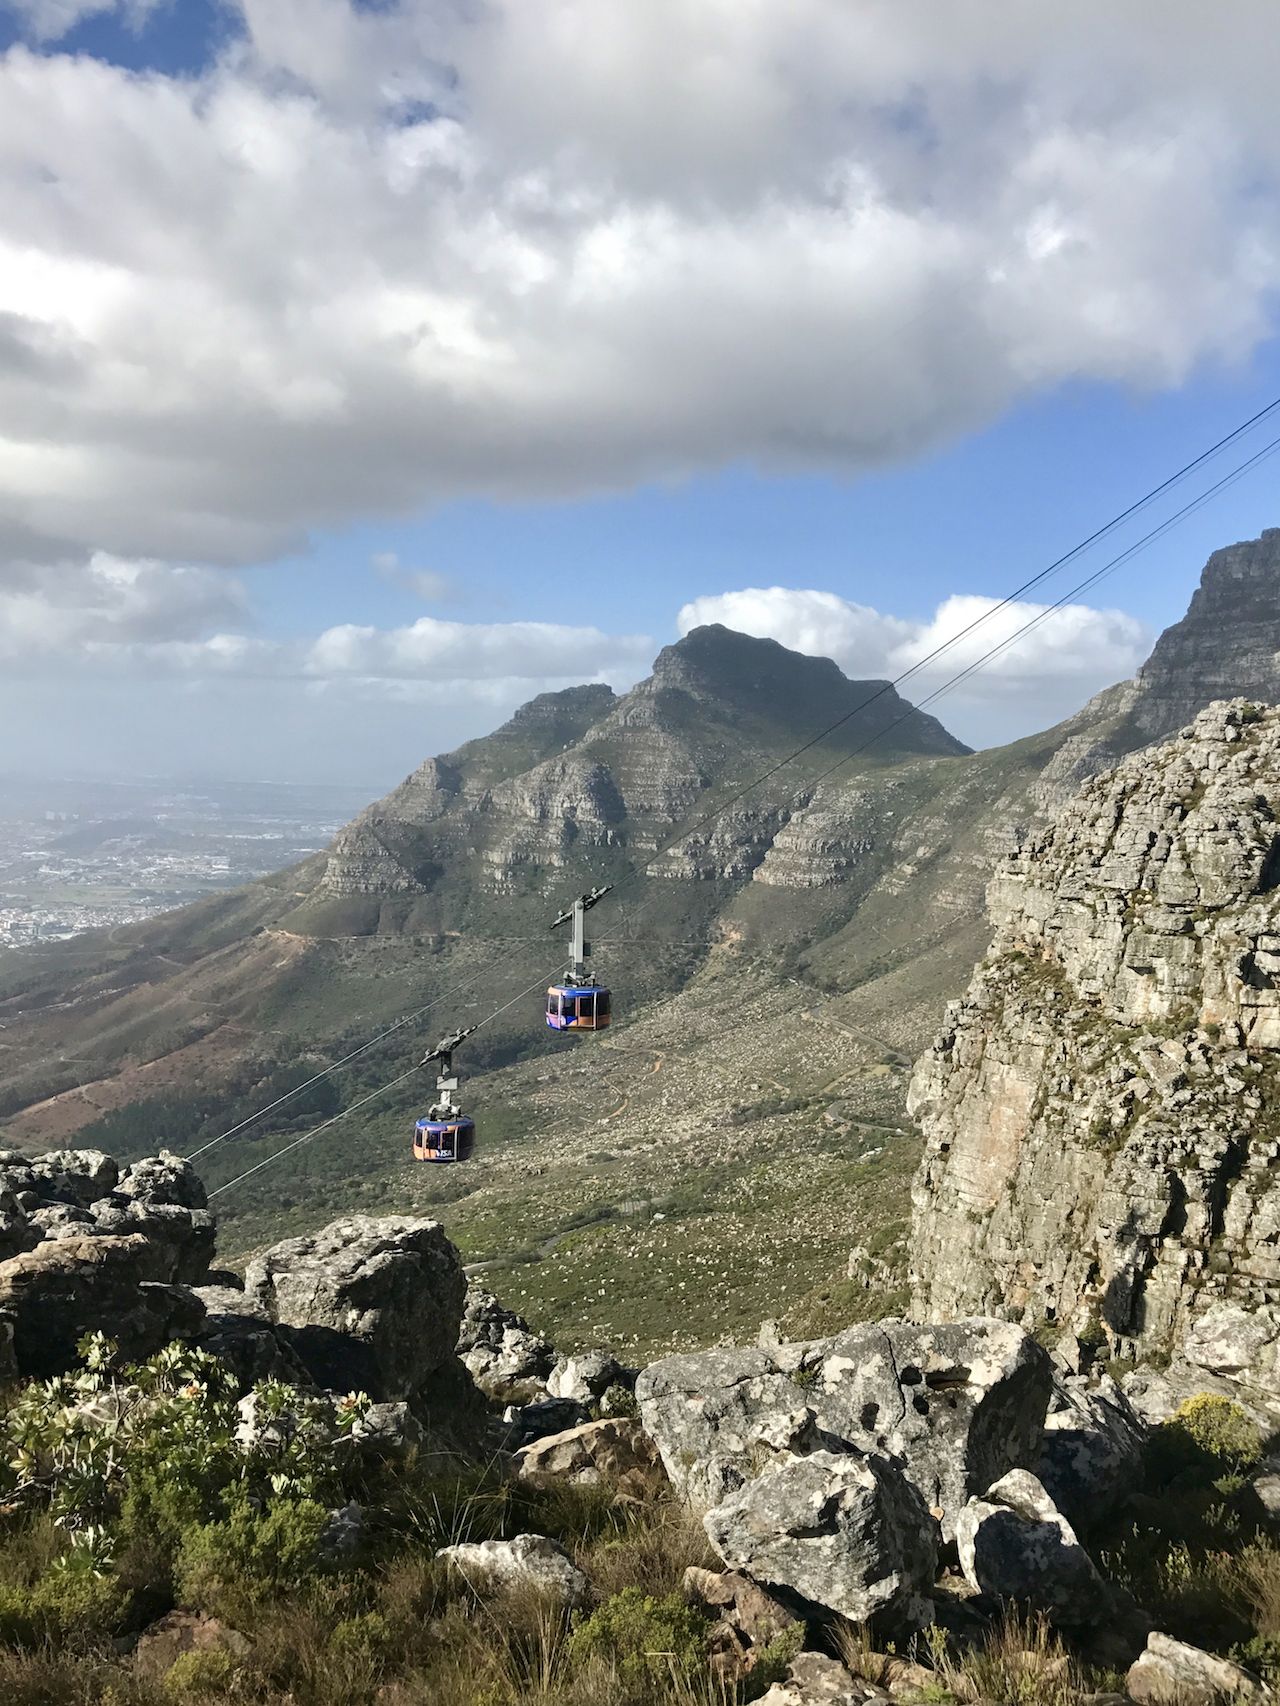 Hiking Table Mountain: the 5 best trails you need to check out